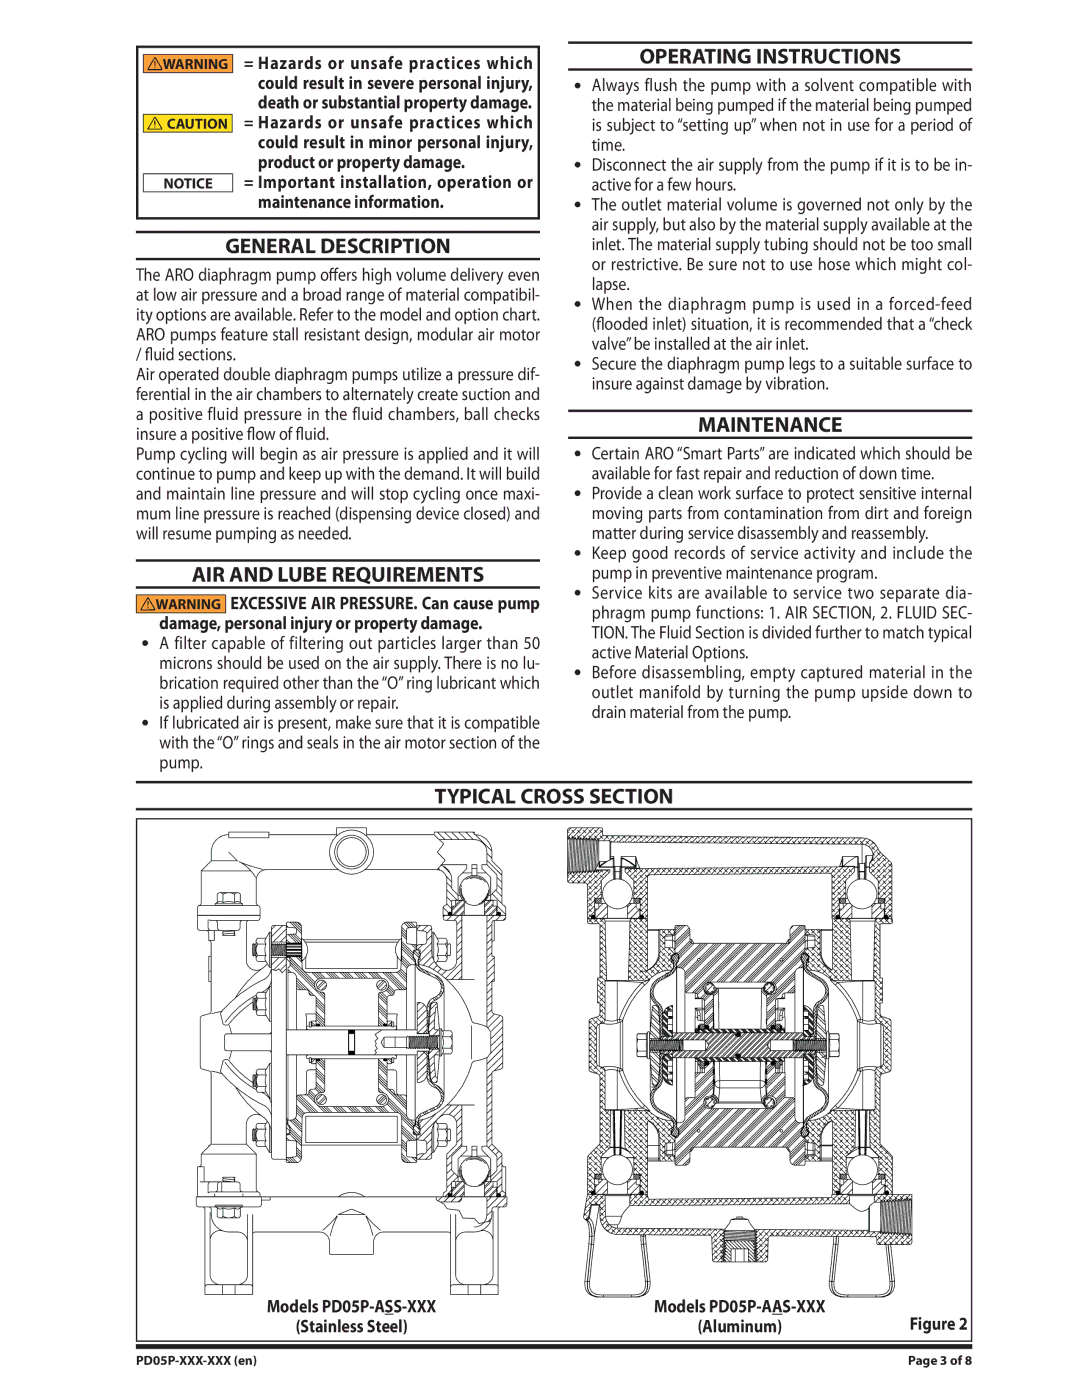 Ingersoll-Rand PD05P-XXX-XXX manual Operating Instructions, General Description, AIR and Lube Requirements, Maintenance 